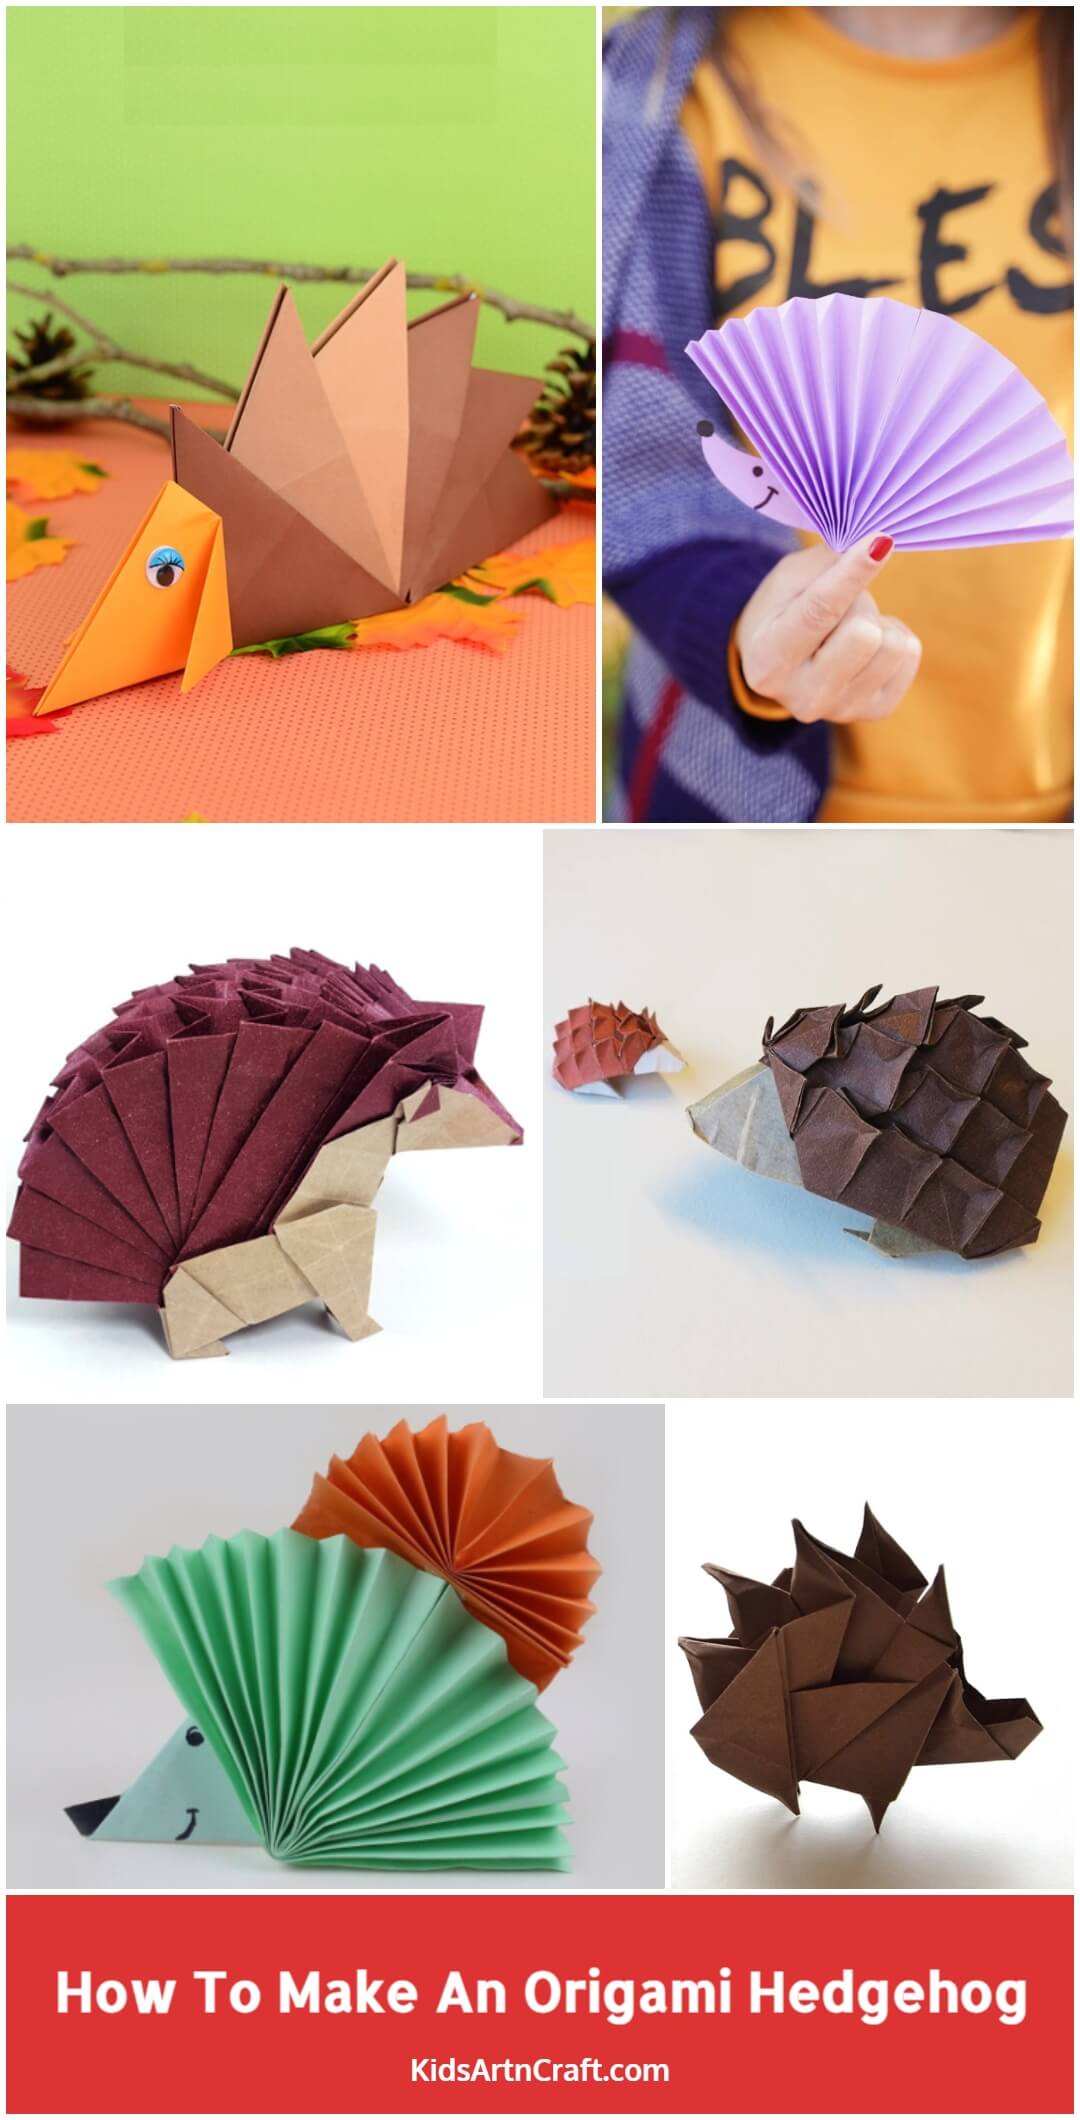 How To Make An Origami Hedgehog With Kids